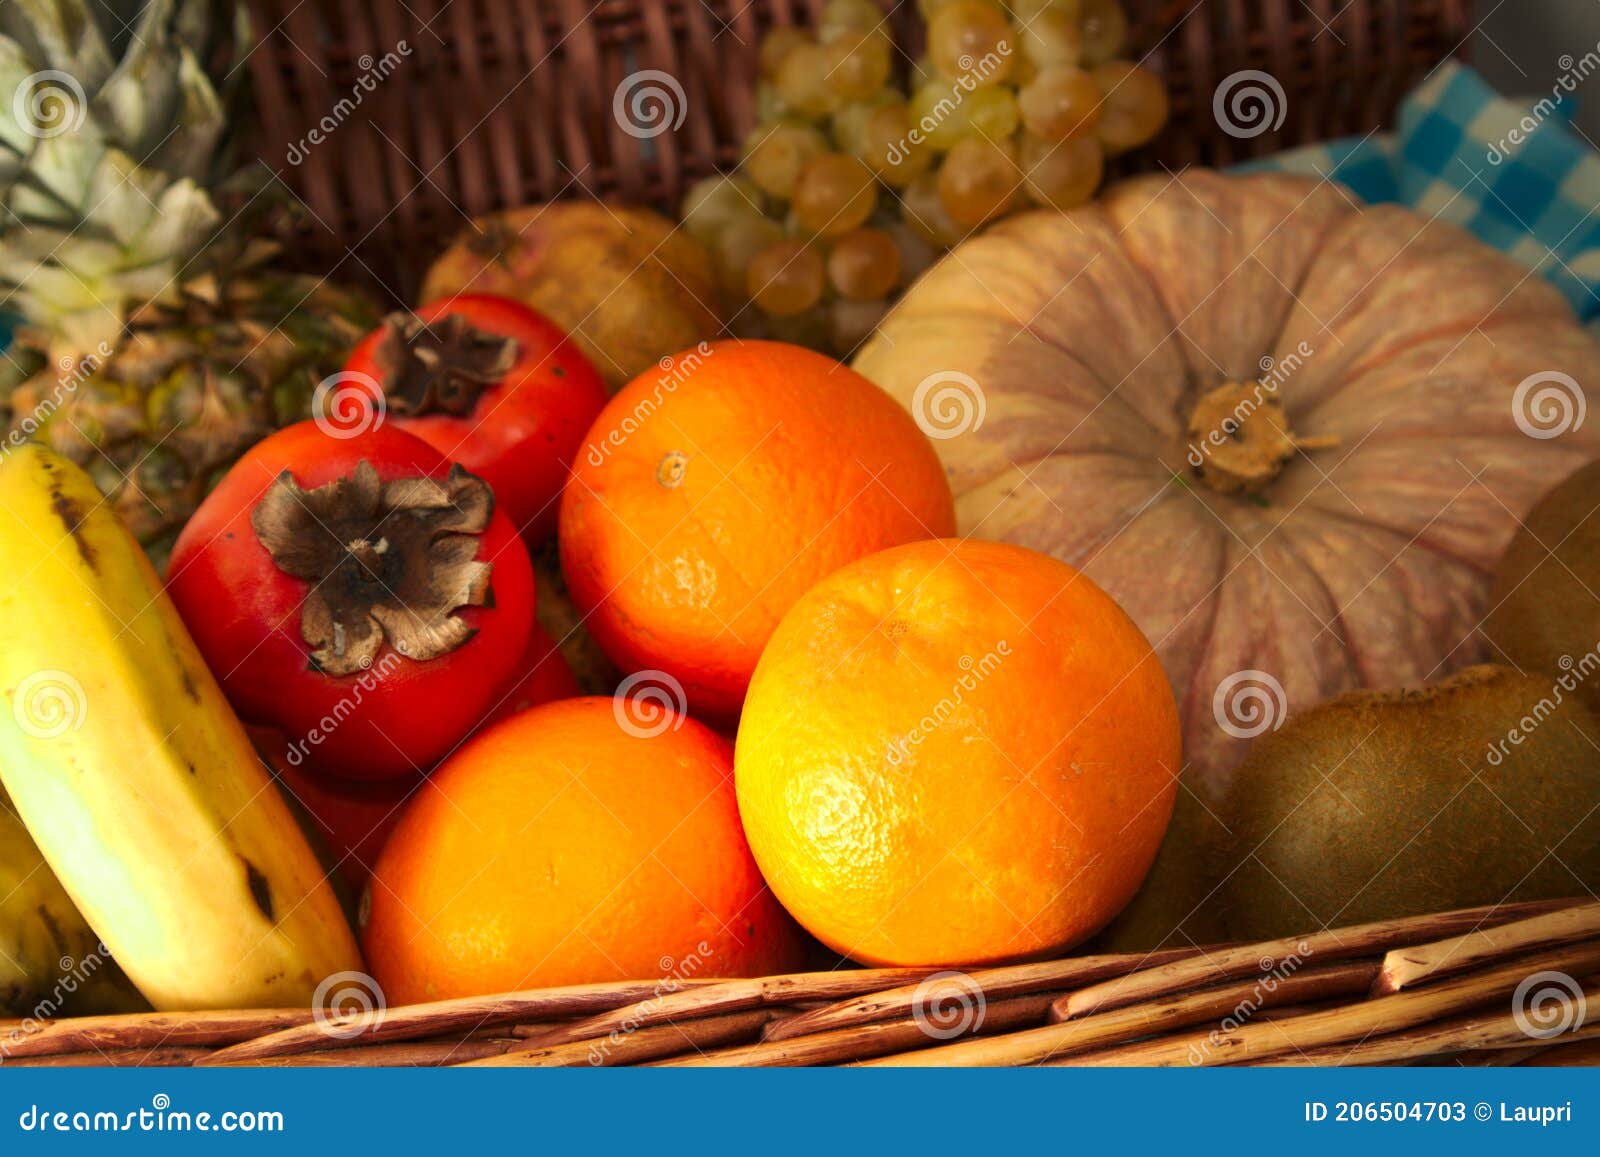 close-up of a basket with autumn and winter fruit